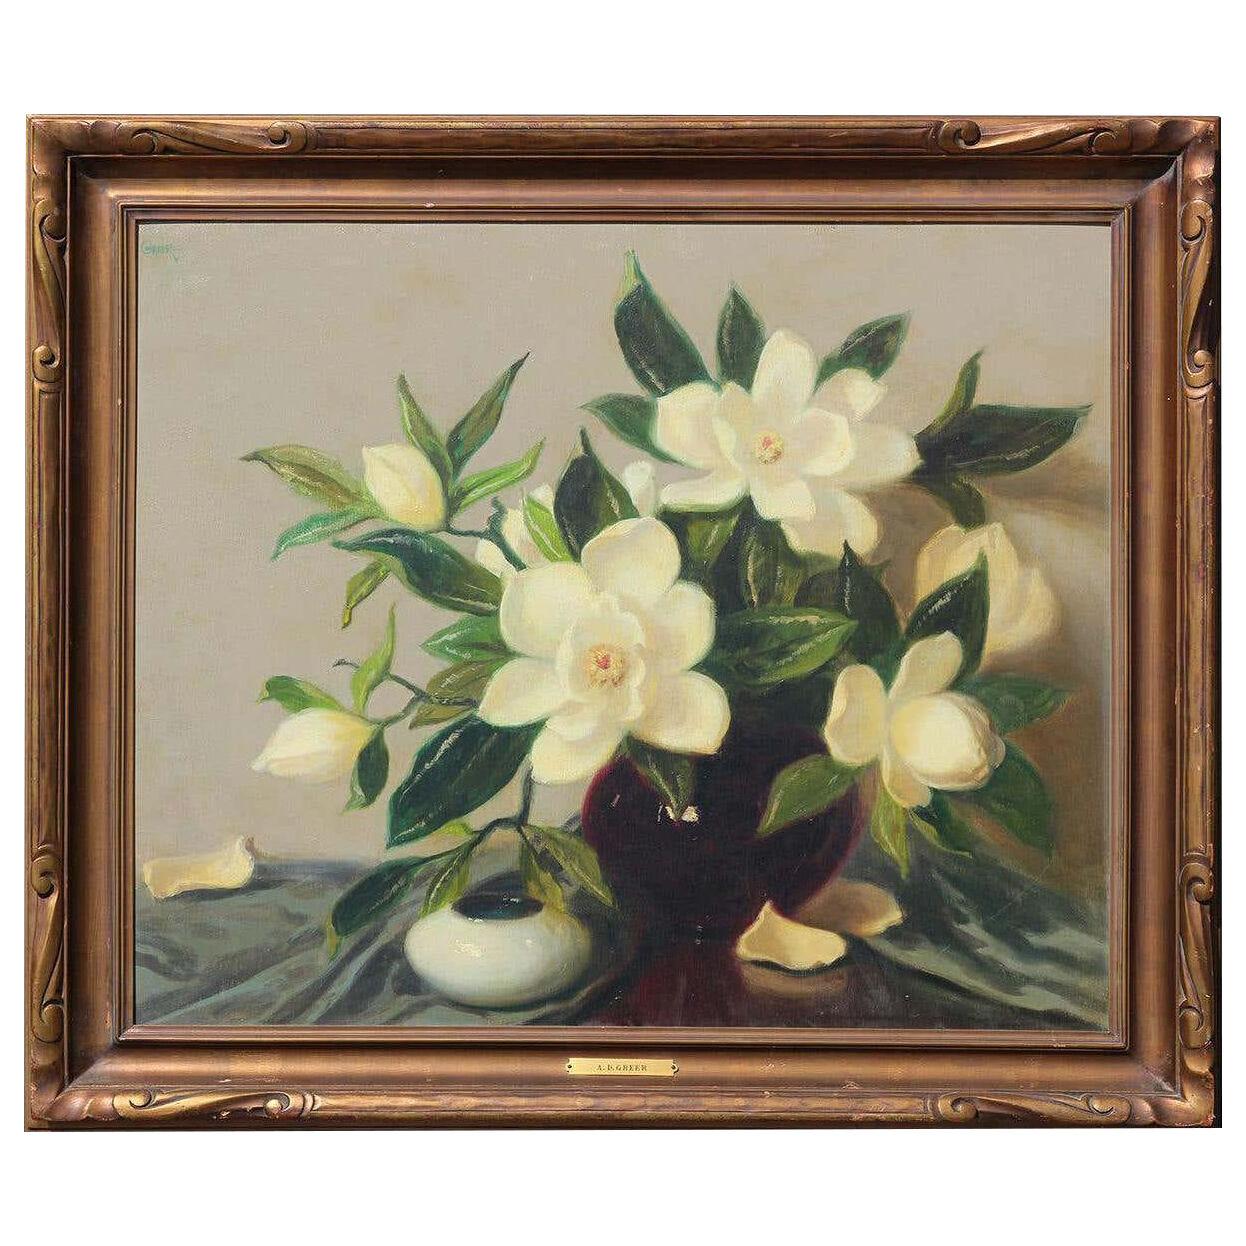 Late 20th C Magnolia Flowers Interior Still Life Painting by A.D. Greer, Framed